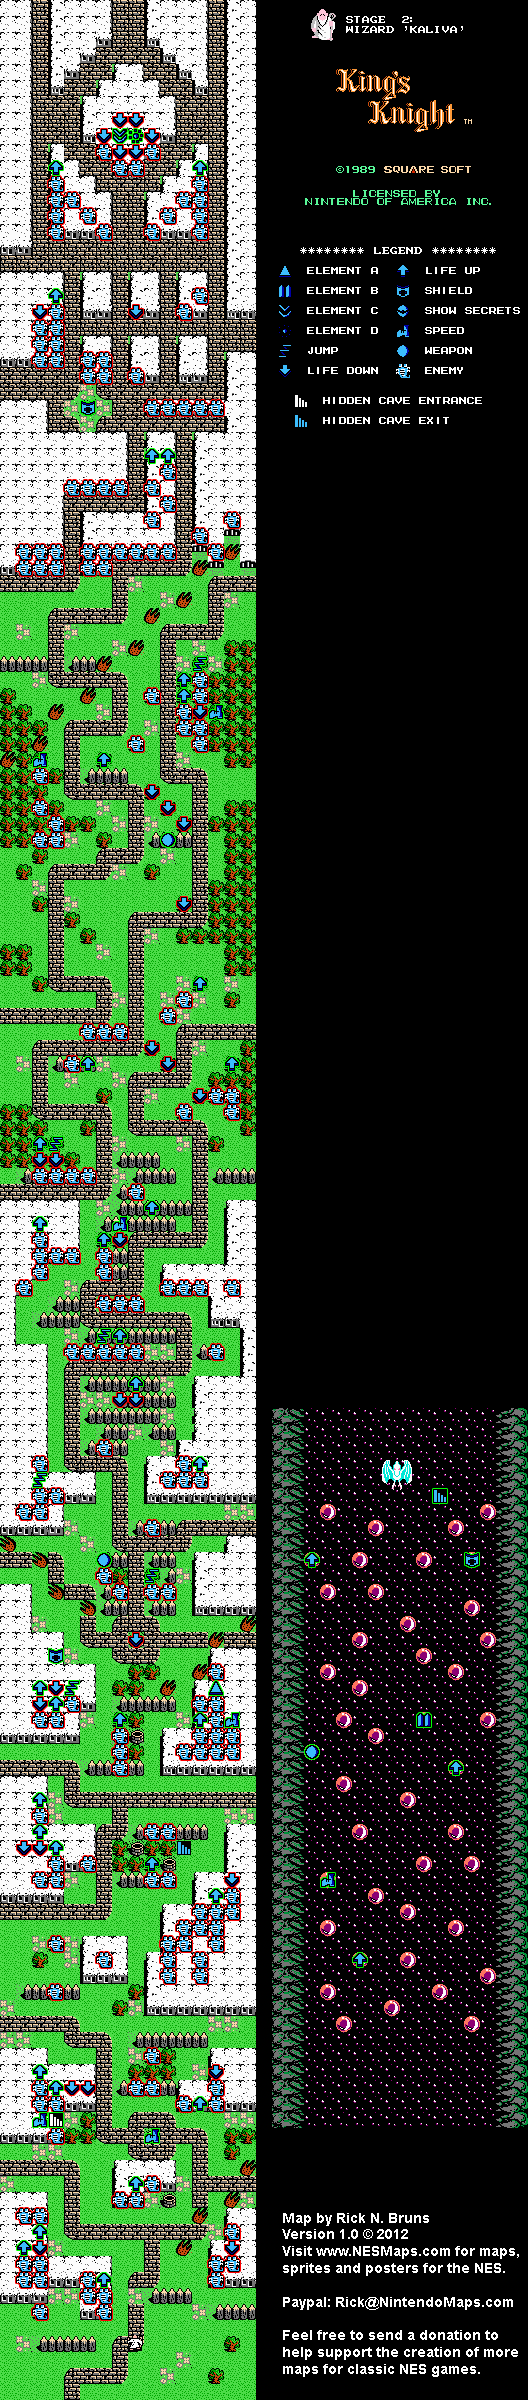 King's Knight - Stage 2 - Nintendo NES Map